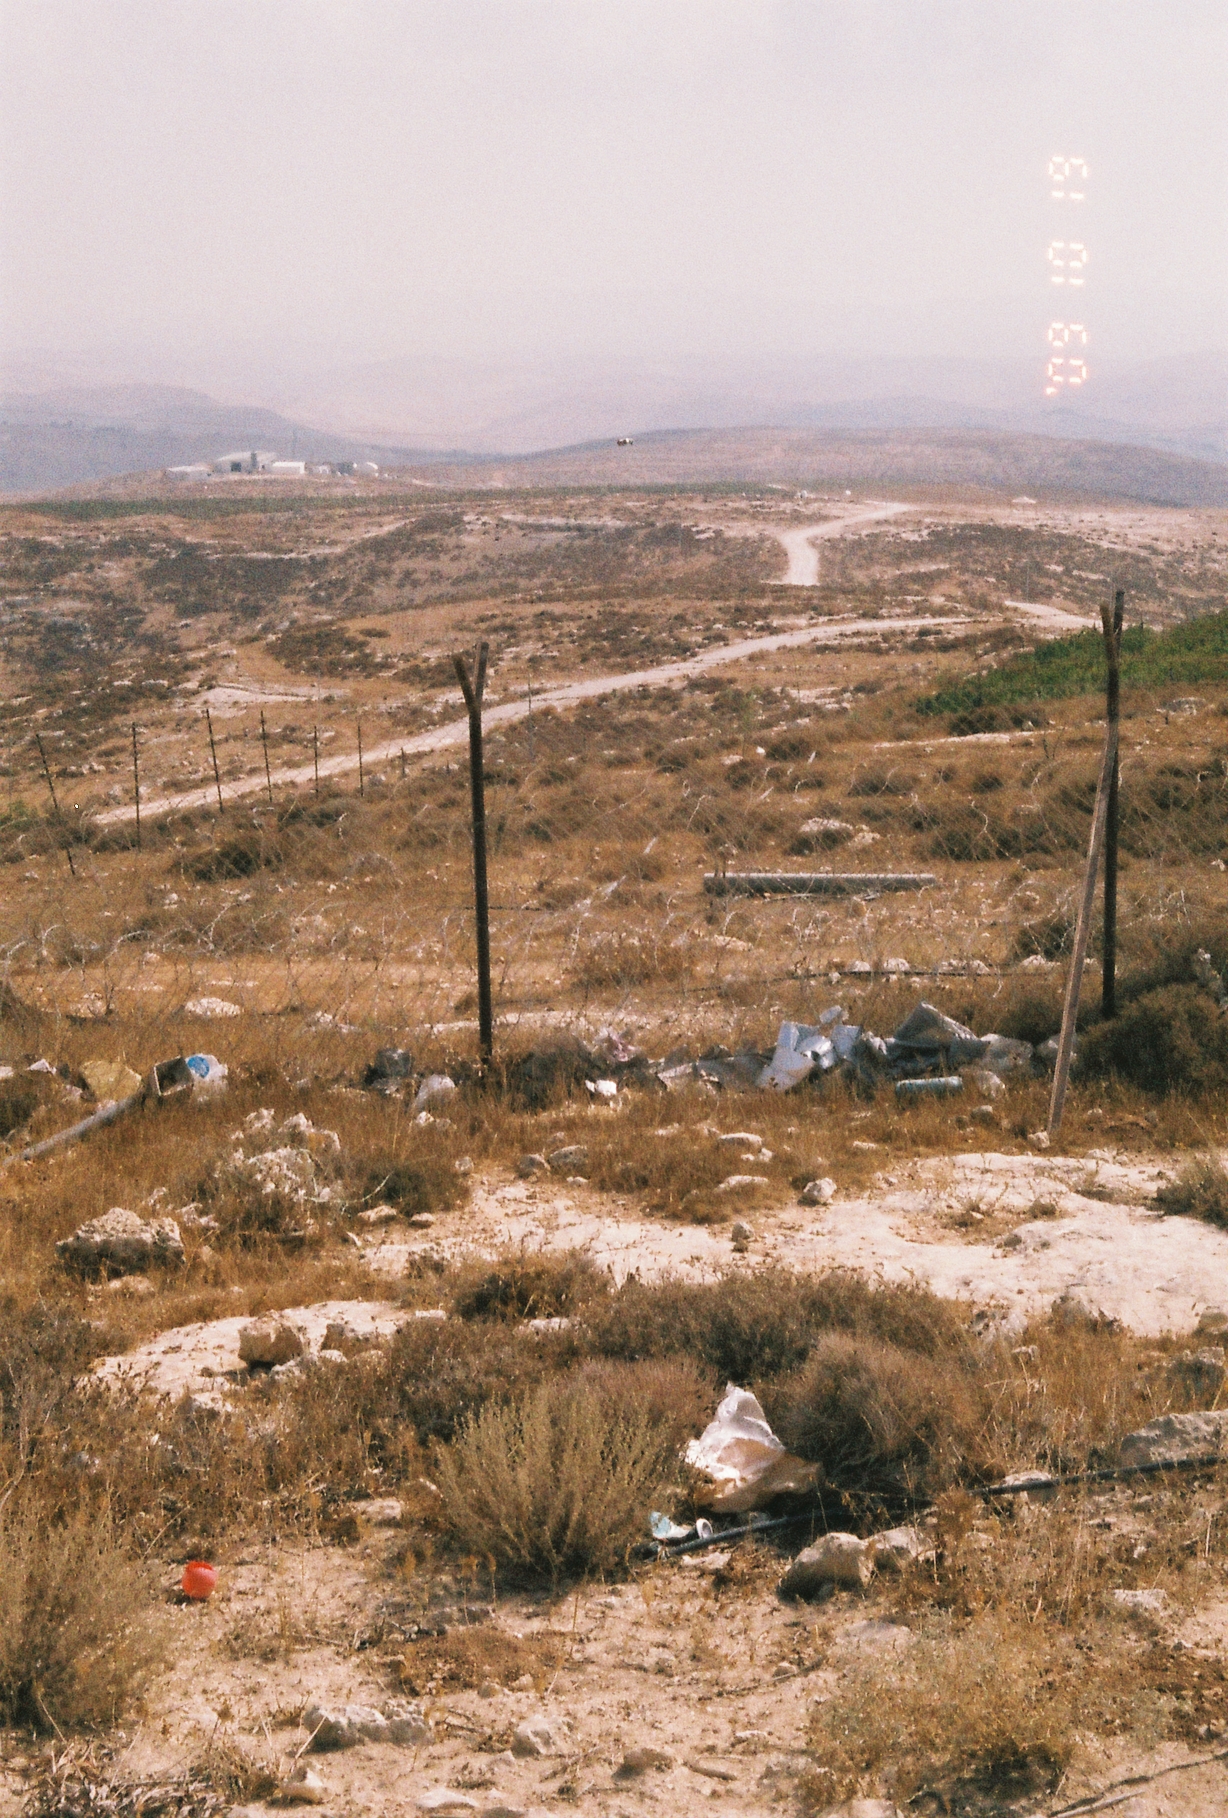 Inside an Israeli settlement in Al-Khalil, Hebron. Barbed wire maps the border of settlement, and path to another facility a part of the settlement.